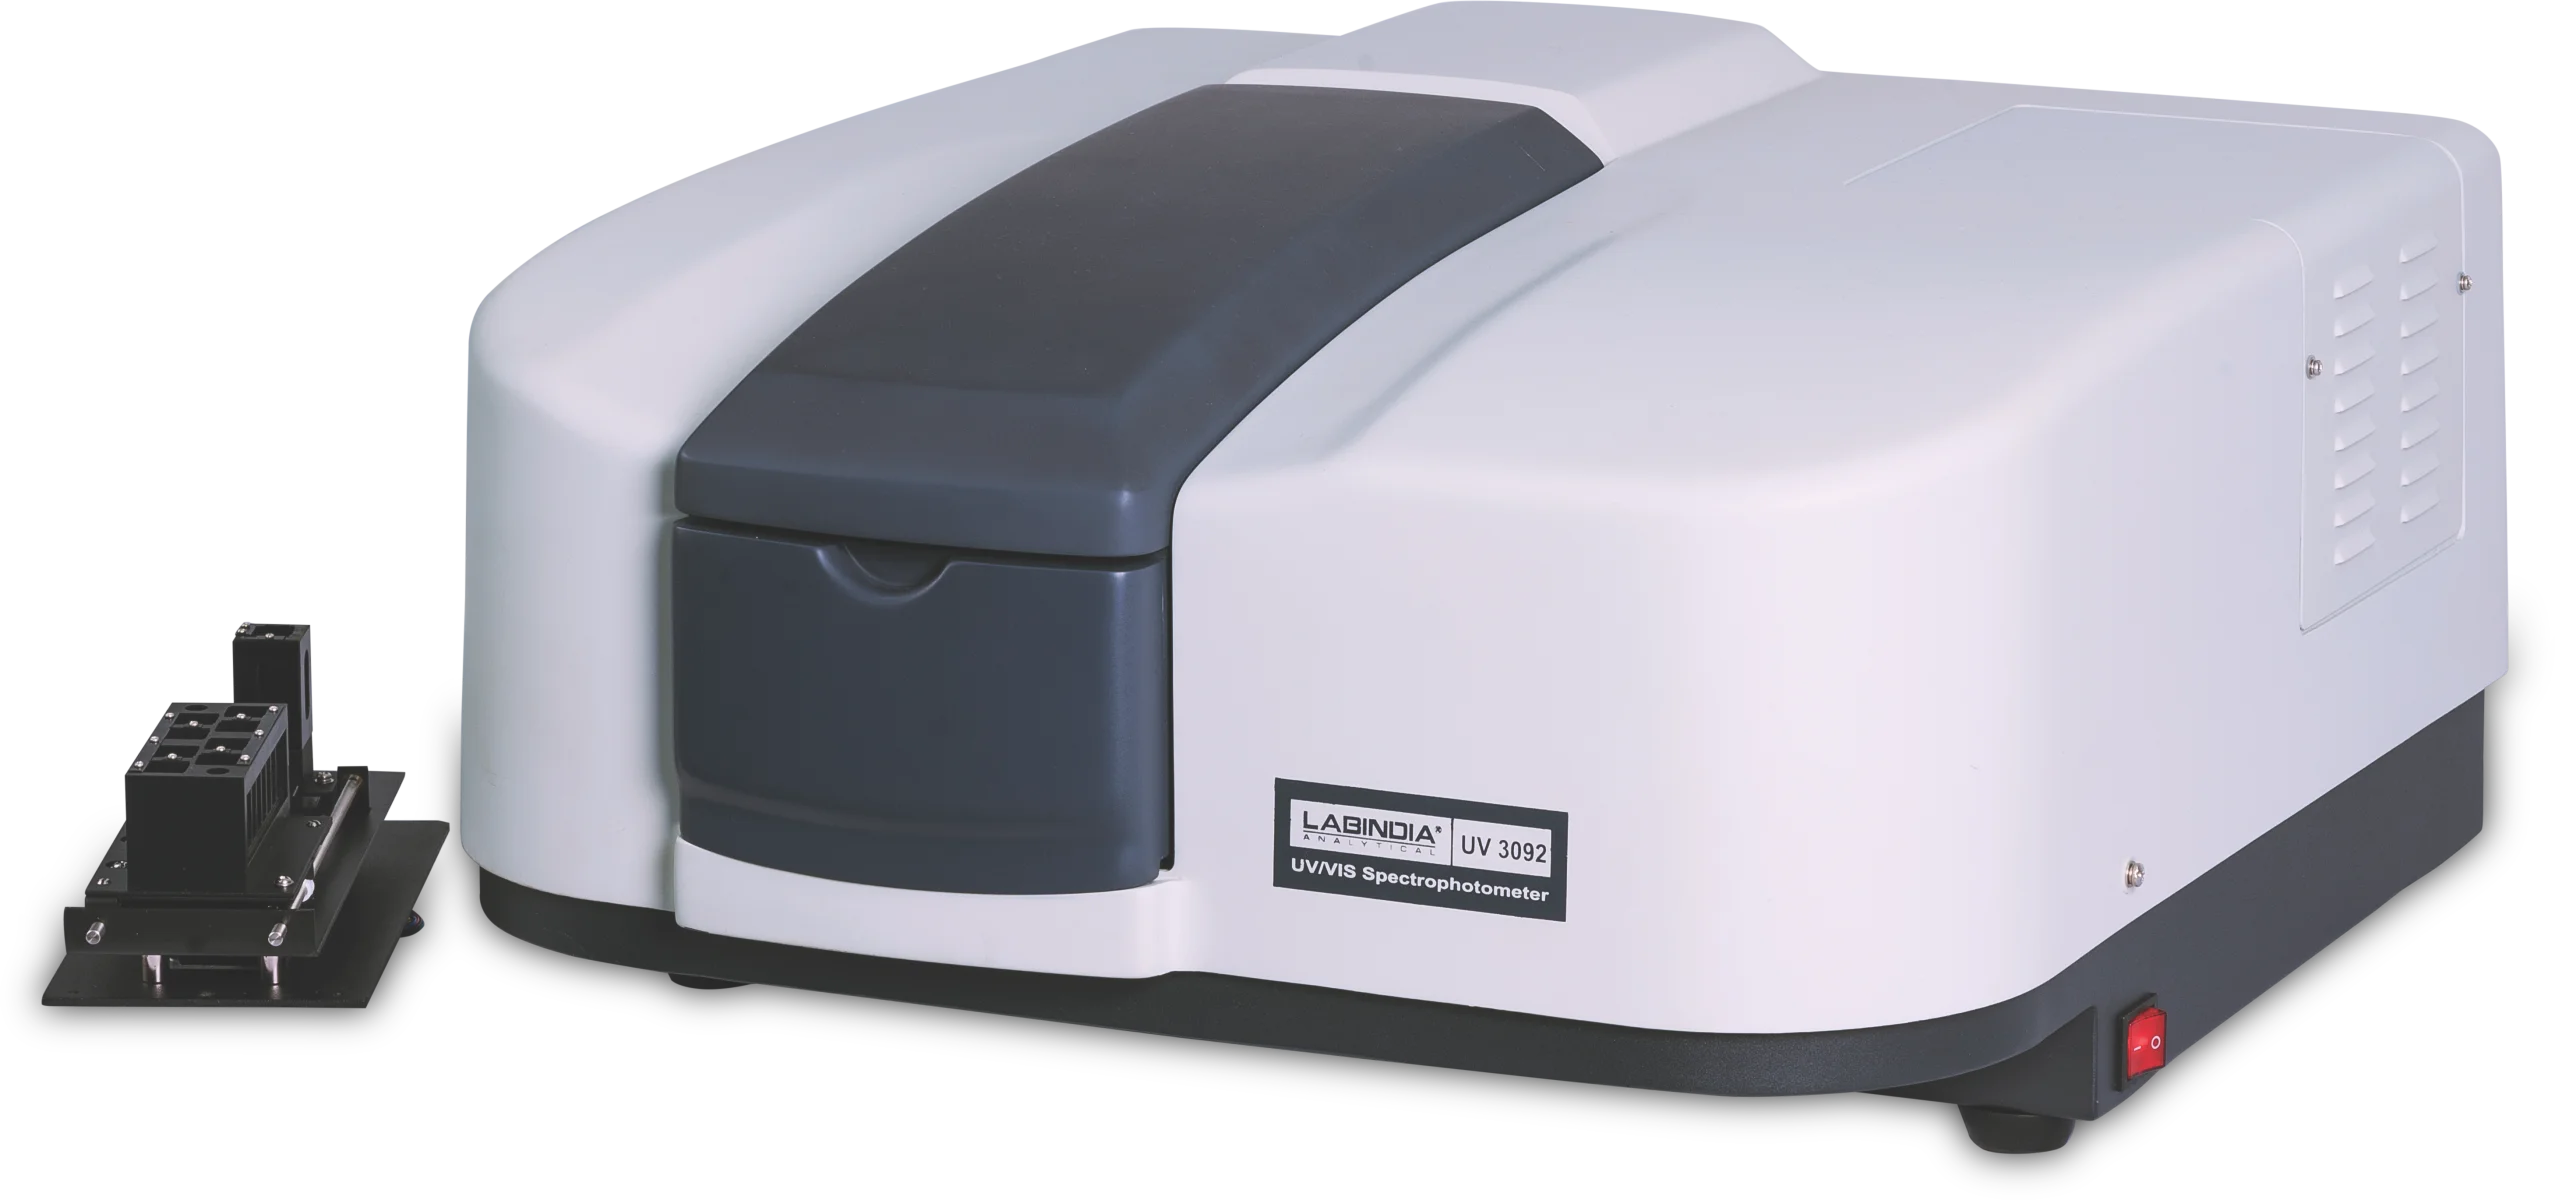 Spectrophotometer is the device used to measure the intensity of electromagnetic energy at each wave